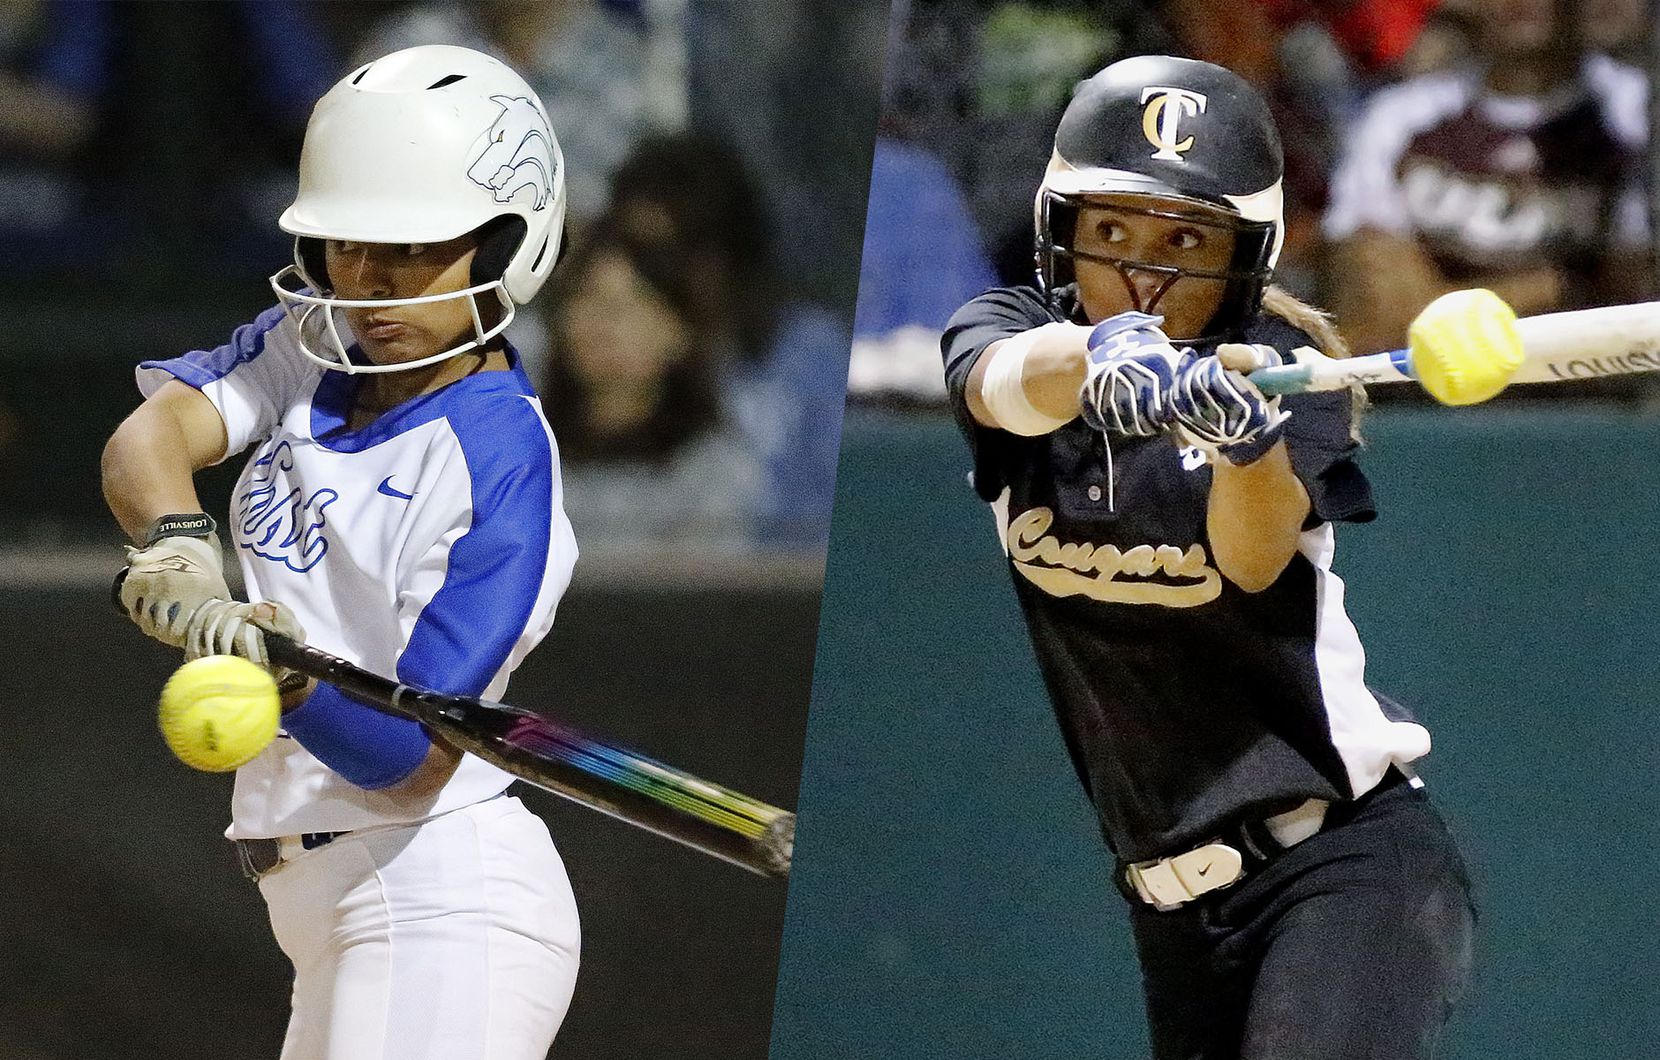 Different ages will suitable for different types of fastpitch bat